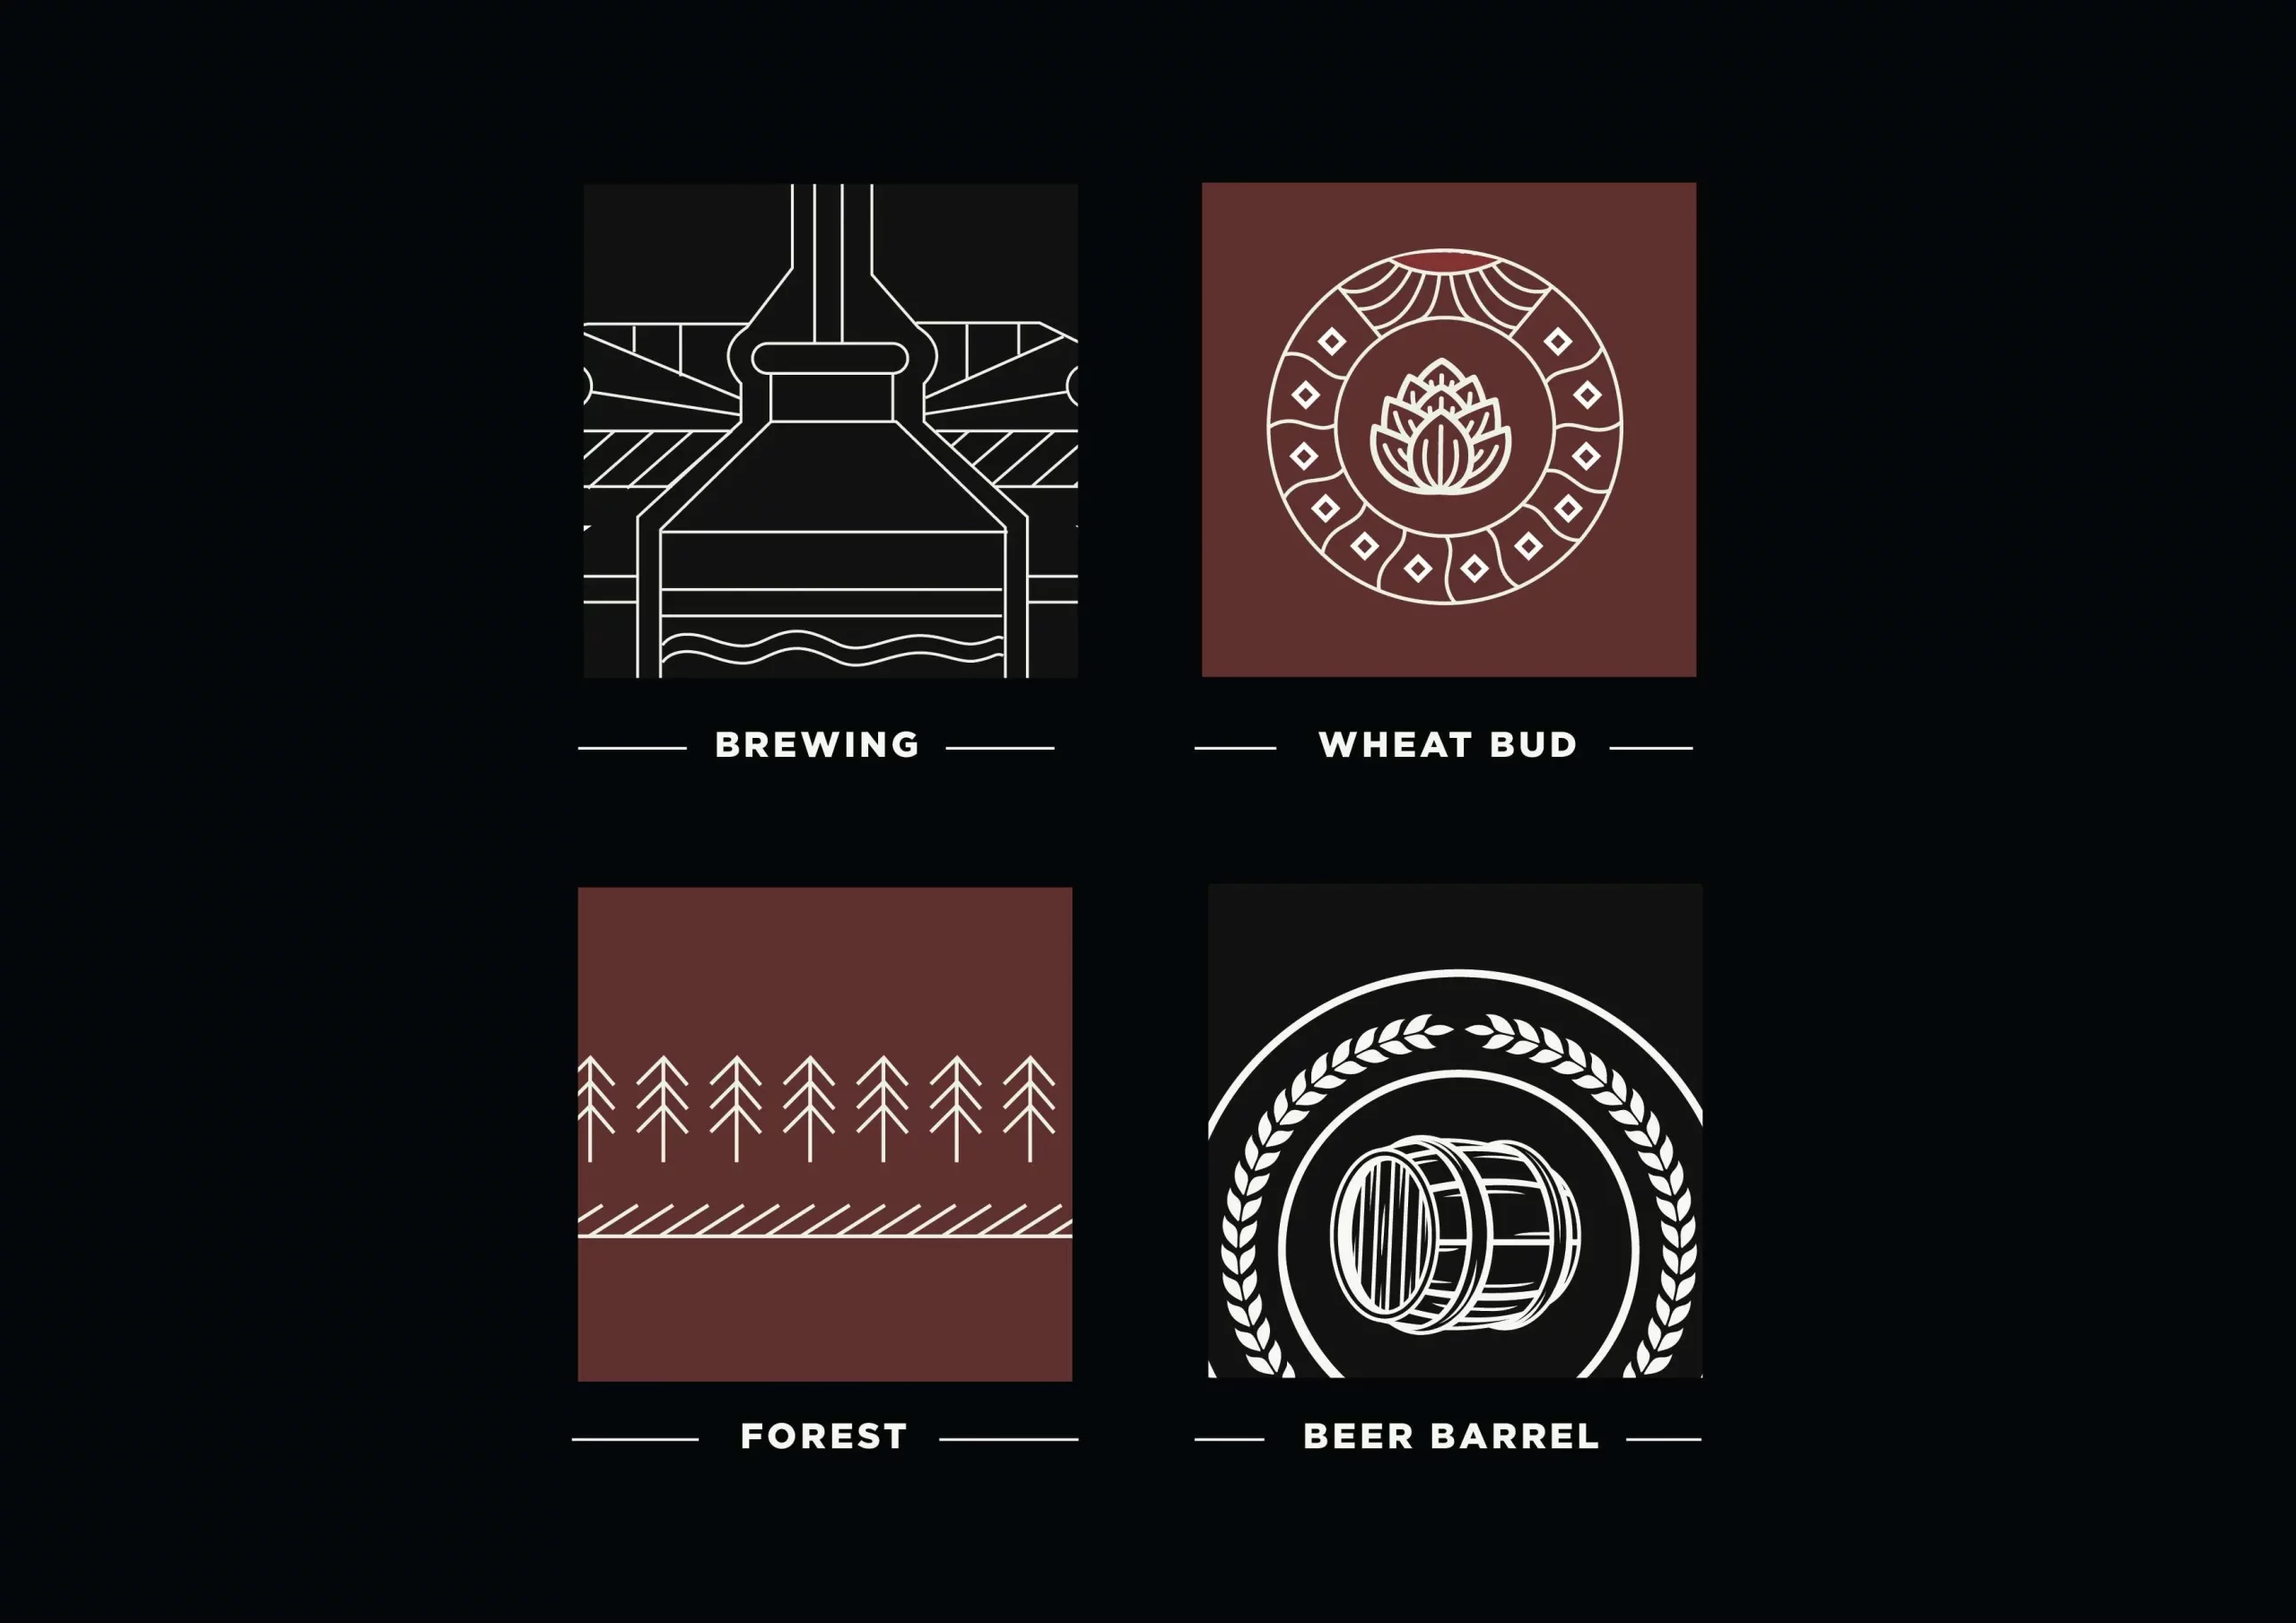 Four different beer logos on a black background.